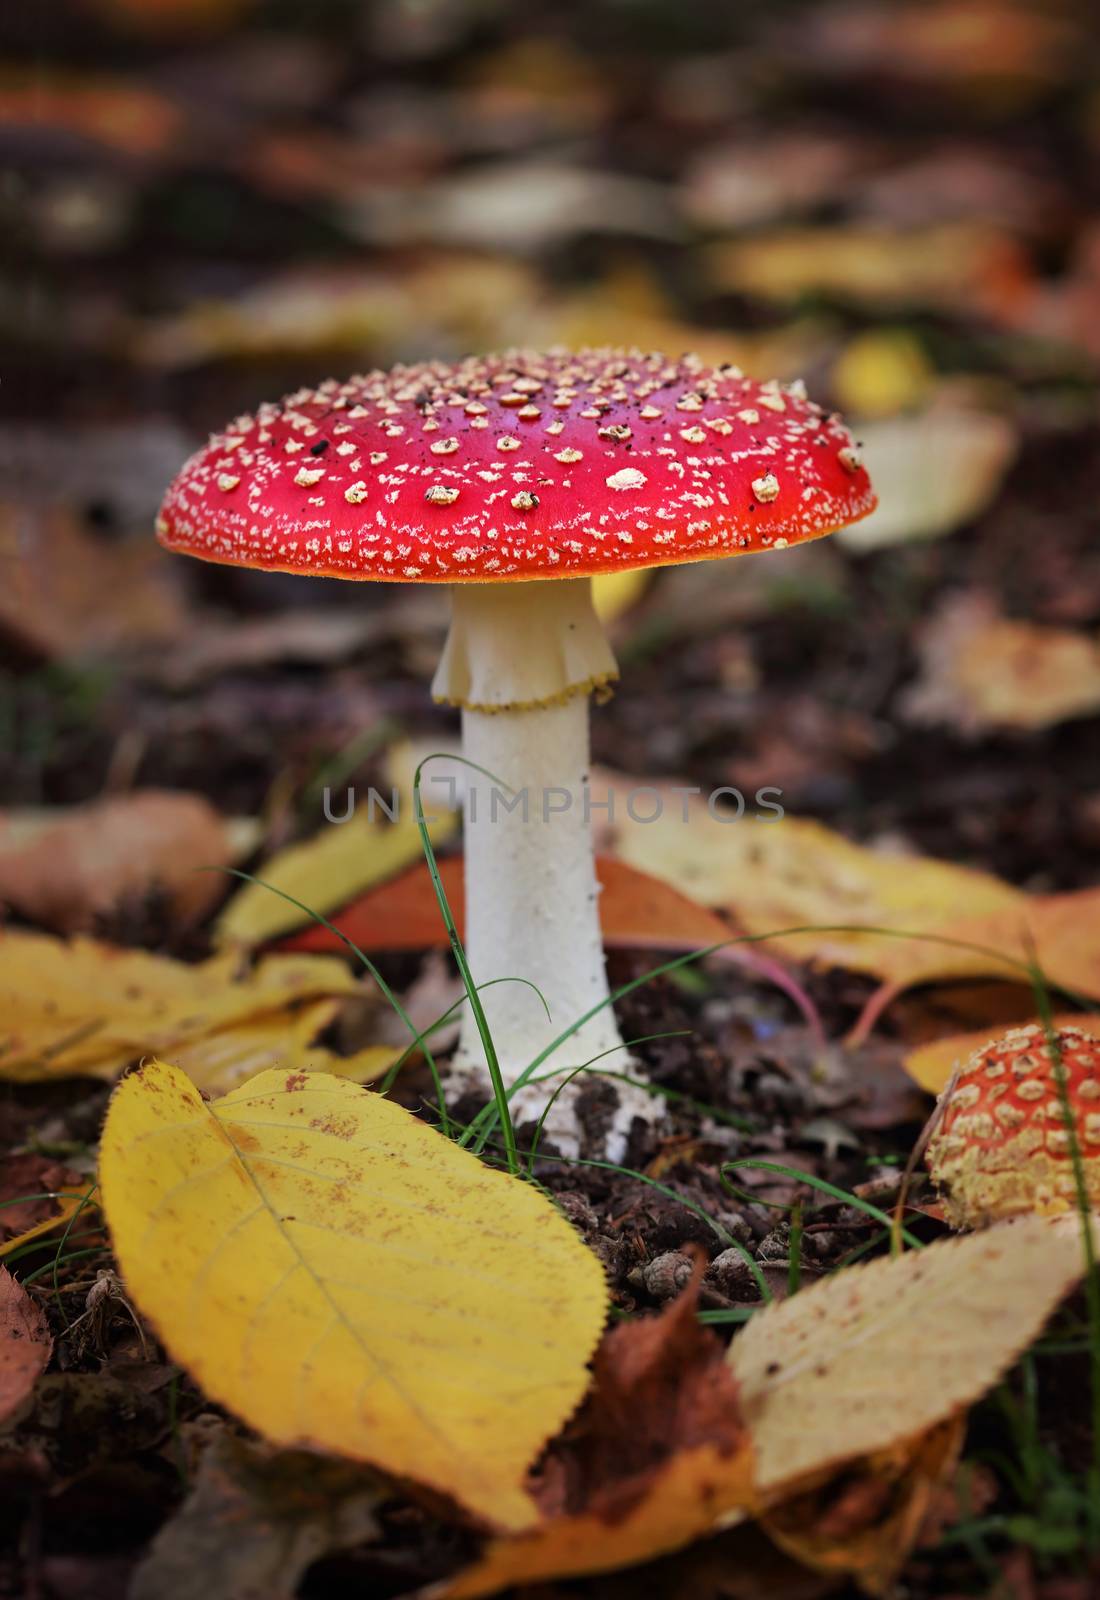 Beautiful mushroom distinquished by its white spots, called warts on a red domed top, usually found growing around birch, pine, spruce and deciduous trees.  It has a psychoactive ingredient, noted for its hallucinogenic properties and was also used as an inceticide when sprinkled in milk.  .